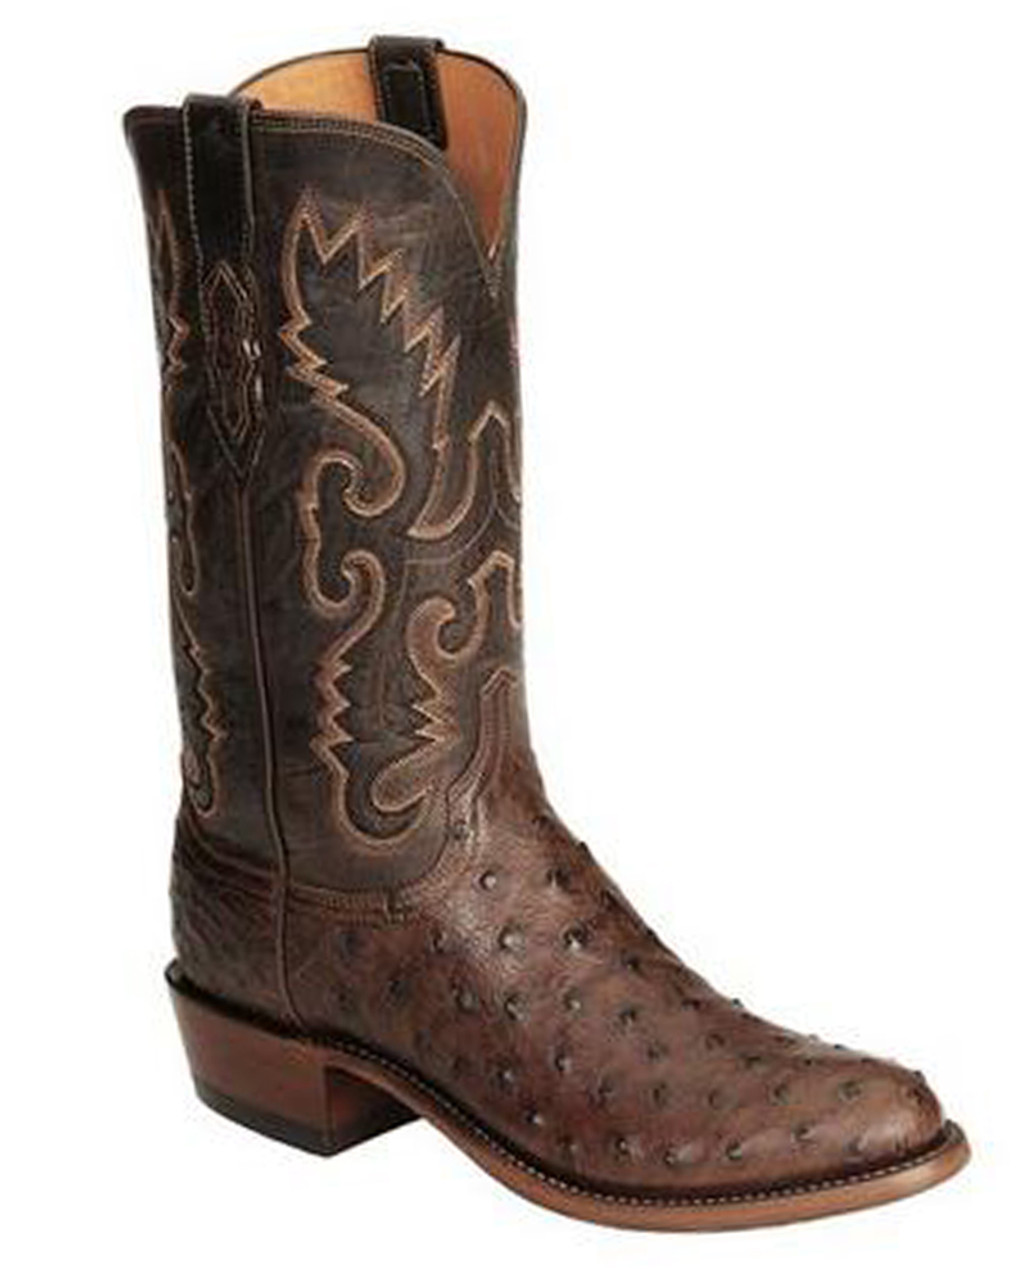 Lucchese N1132.R4 Men's Handcrafted 